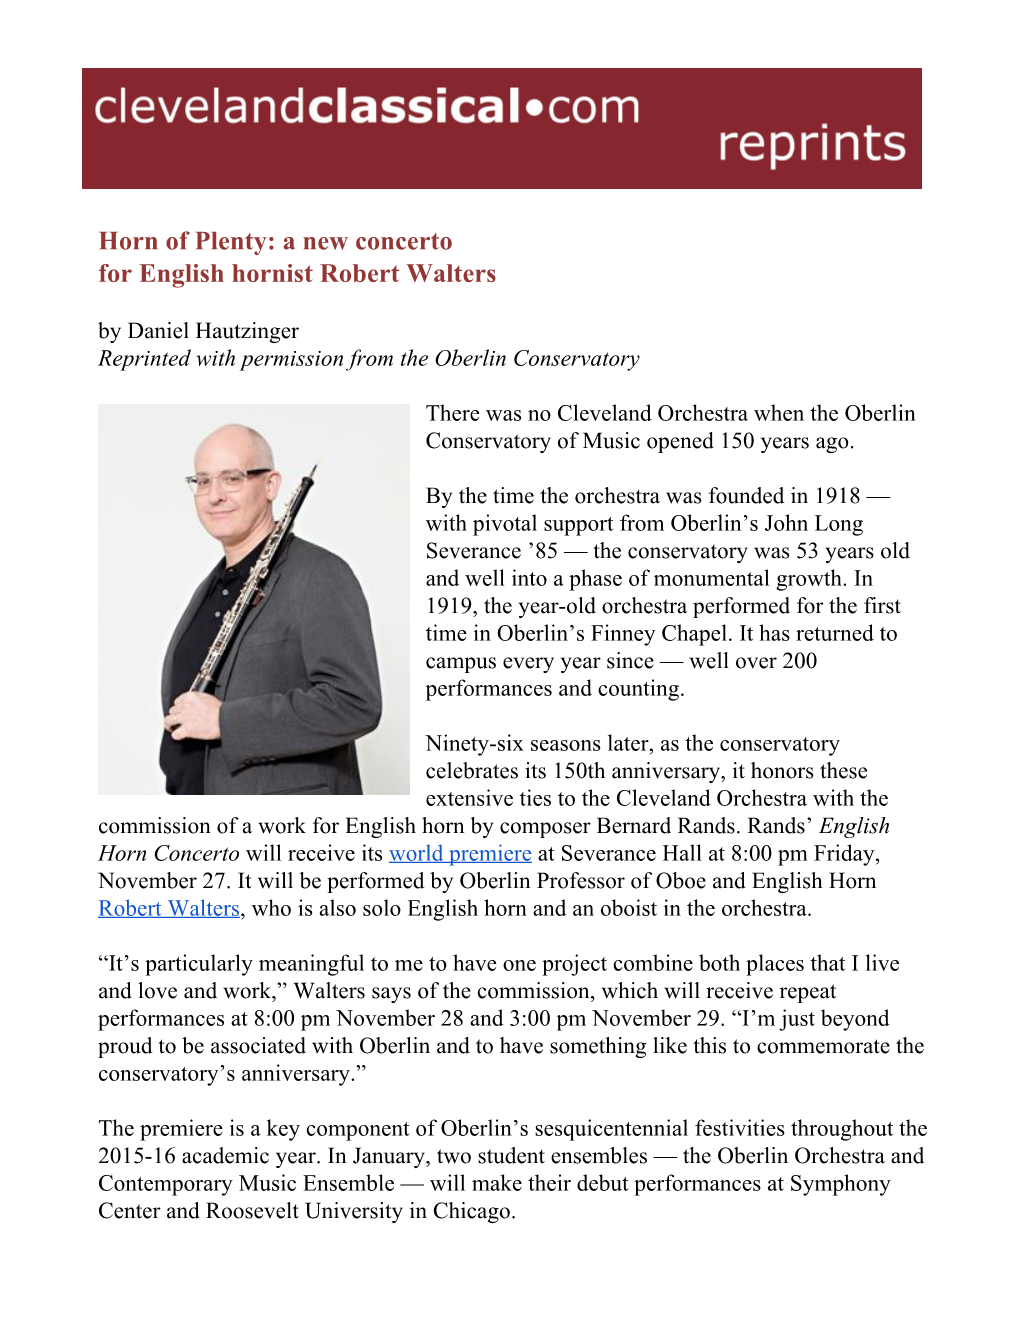 Horn of Plenty: a New Concerto for English Hornist Robert Walters by Daniel Hautzinger Reprinted with Permission from the Oberlin Conservatory